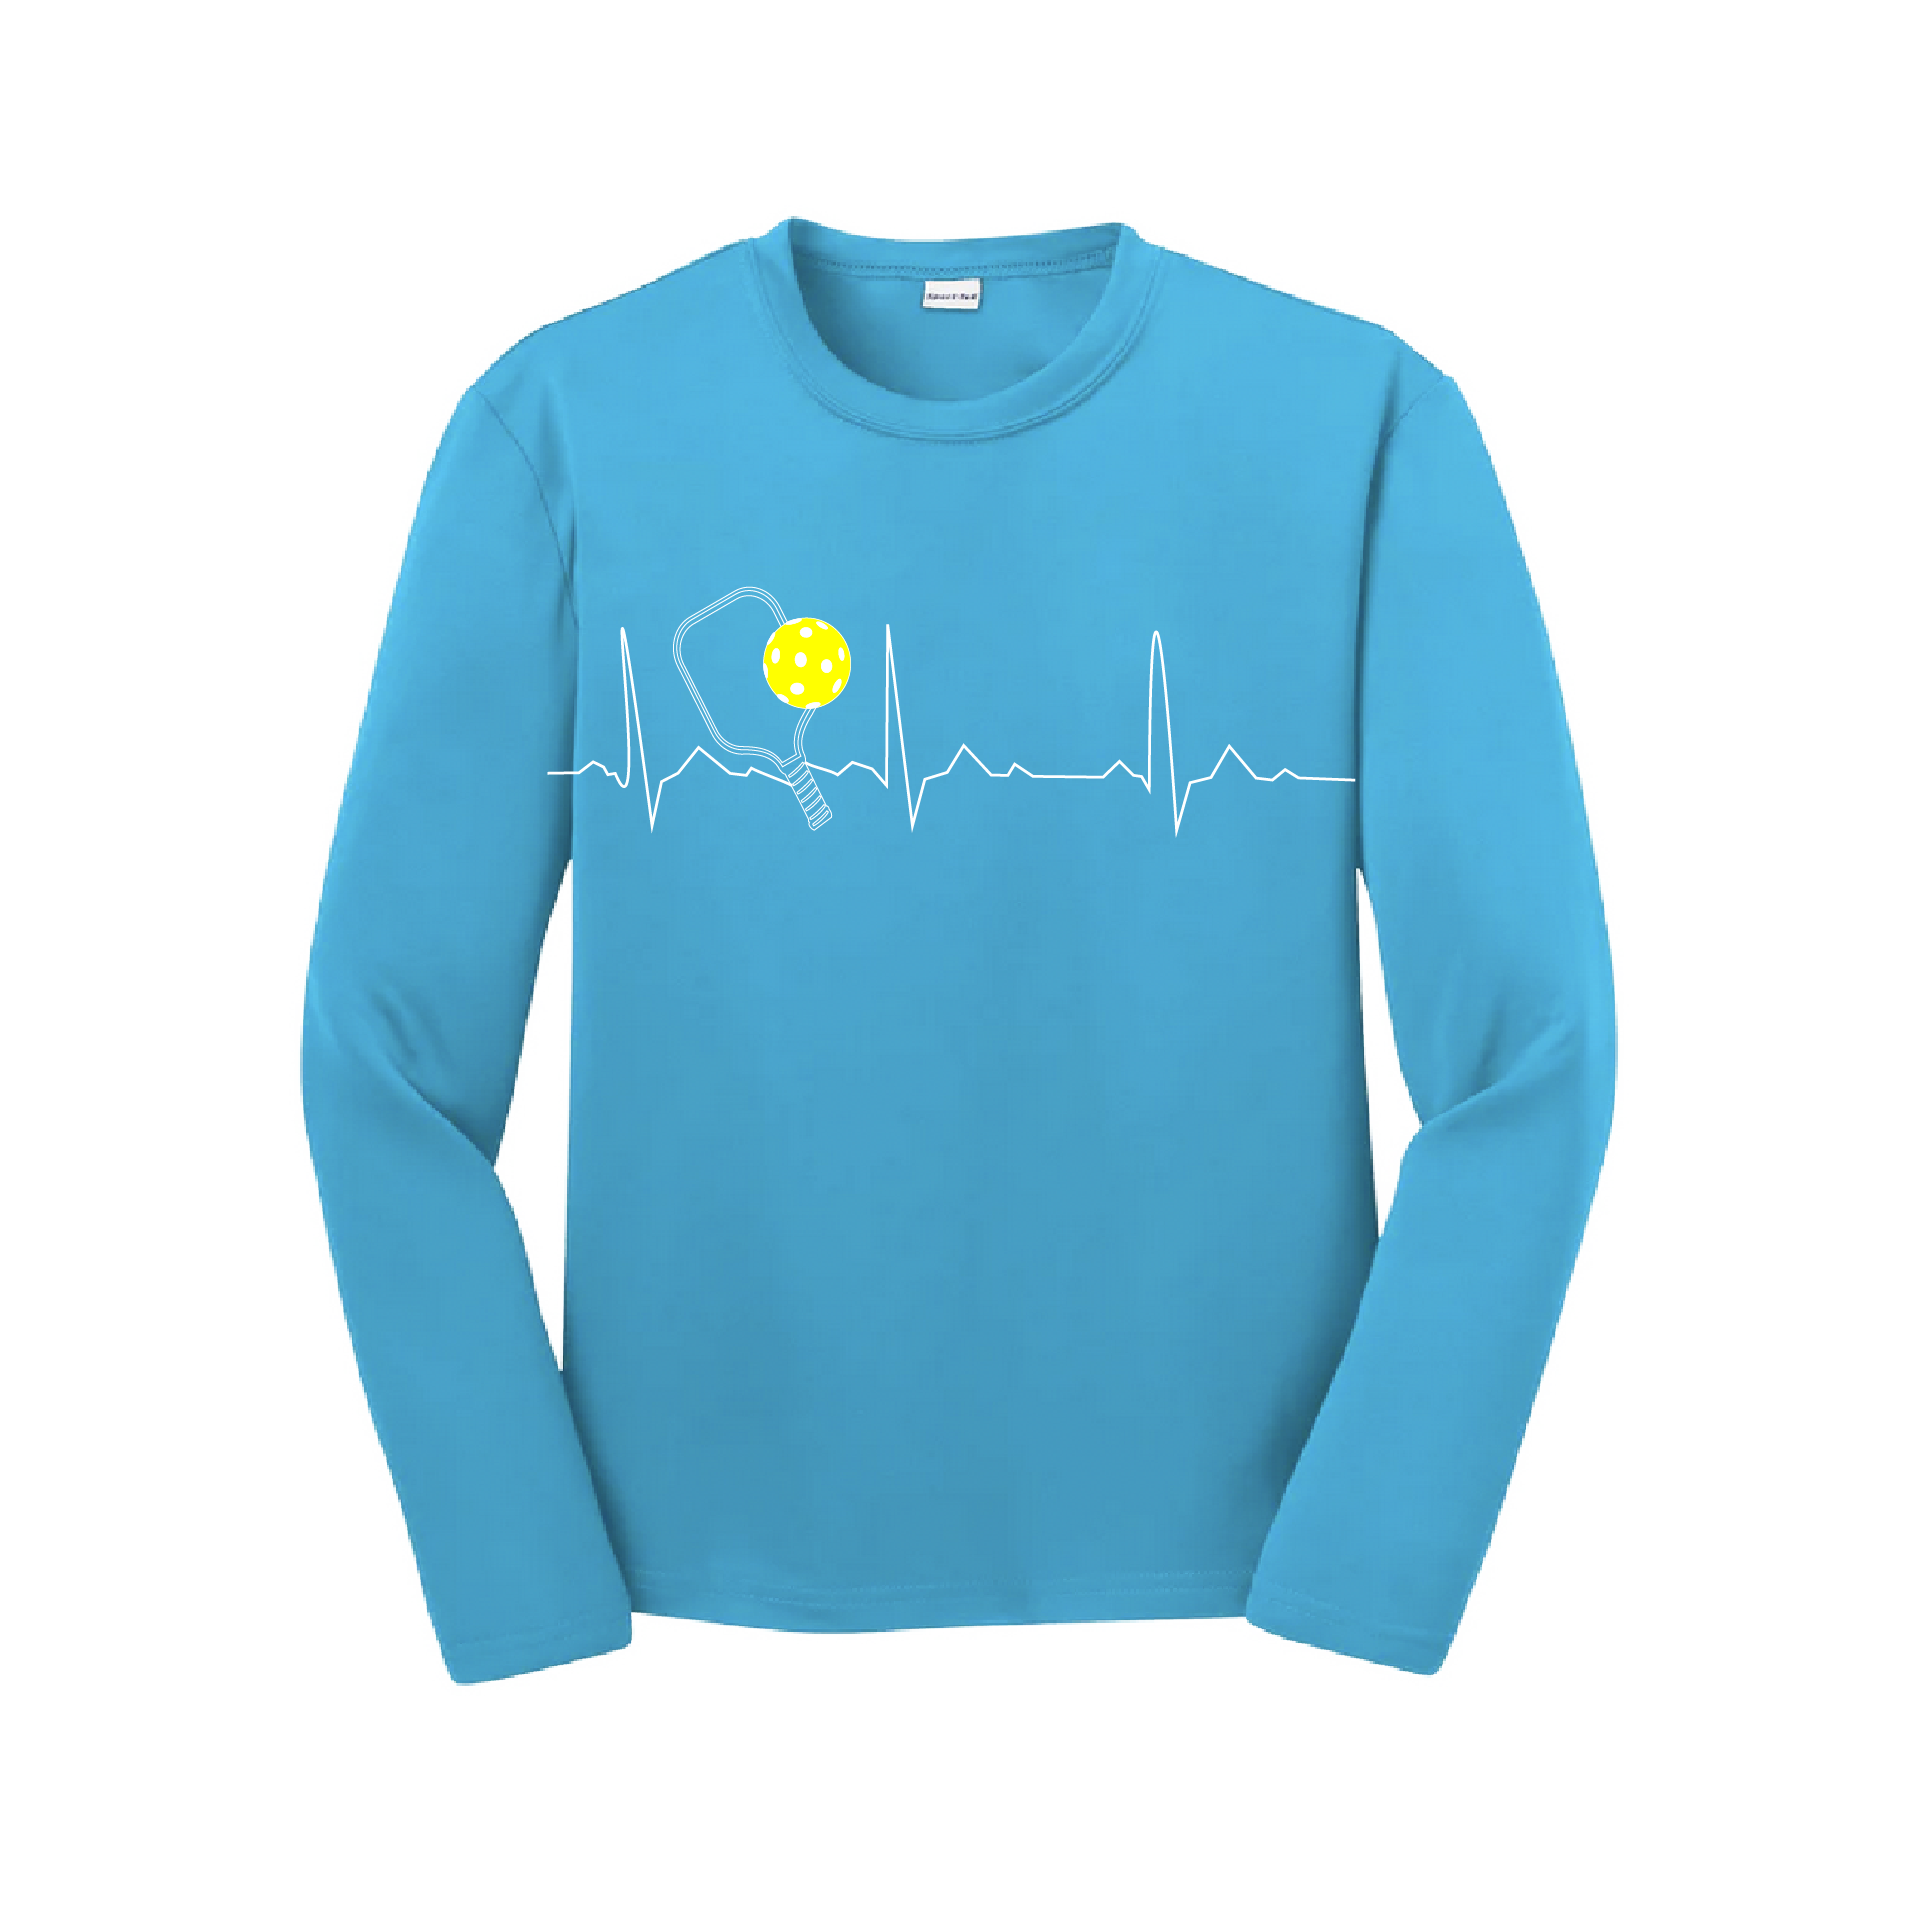 Pickleball Design: Heartbeat  Youth Styles: Long Sleeve  Shirts are lightweight, roomy and highly breathable. These moisture-wicking shirts are designed for athletic performance. They feature PosiCharge technology to lock in color and prevent logos from fading. Removable tag and set-in sleeves for comfort.